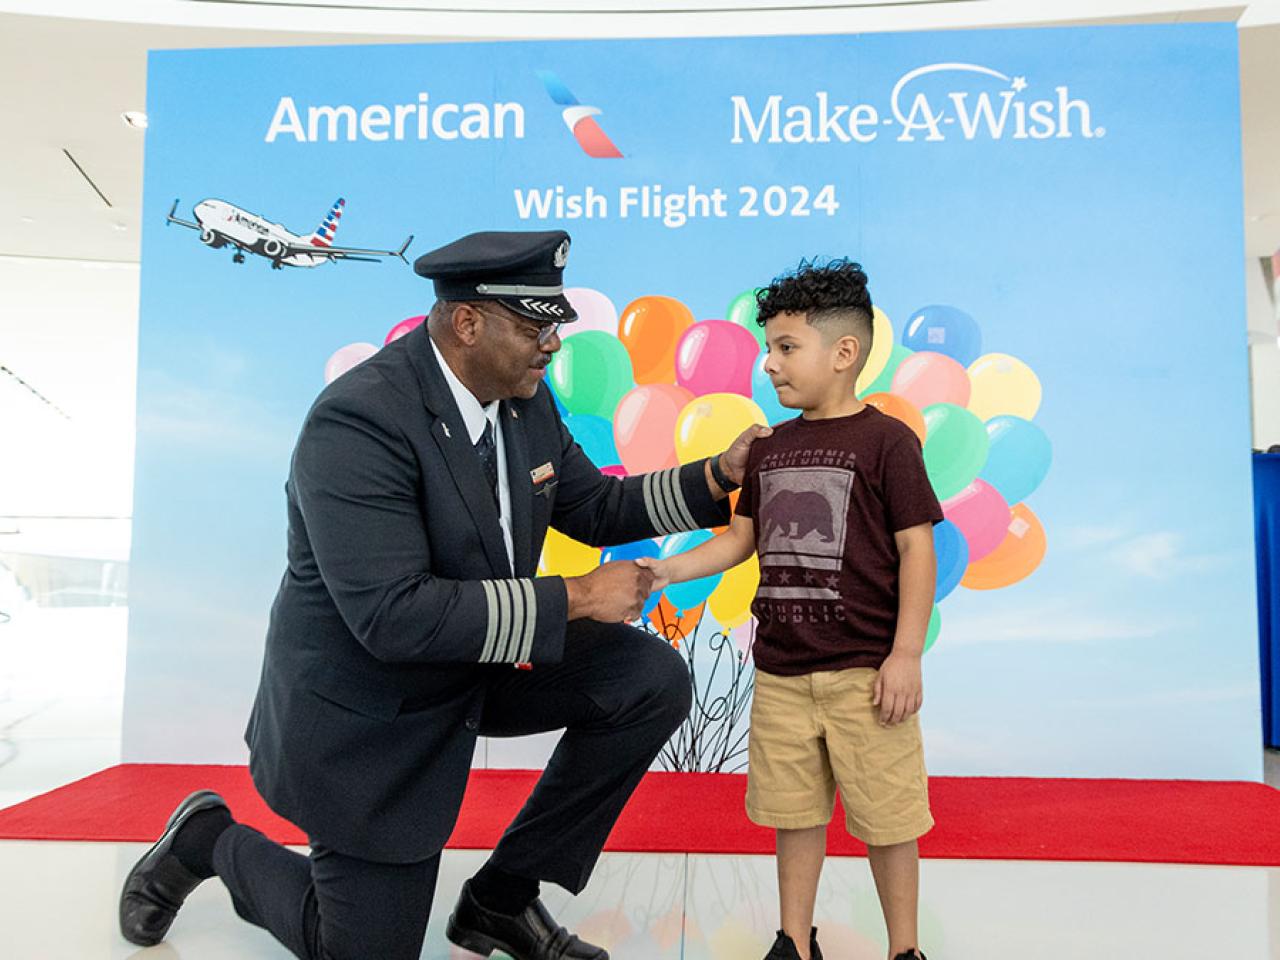 A pilot kneels and shakes the hand of a child. A poster behind them with American and Make a Wish logos, balloons.